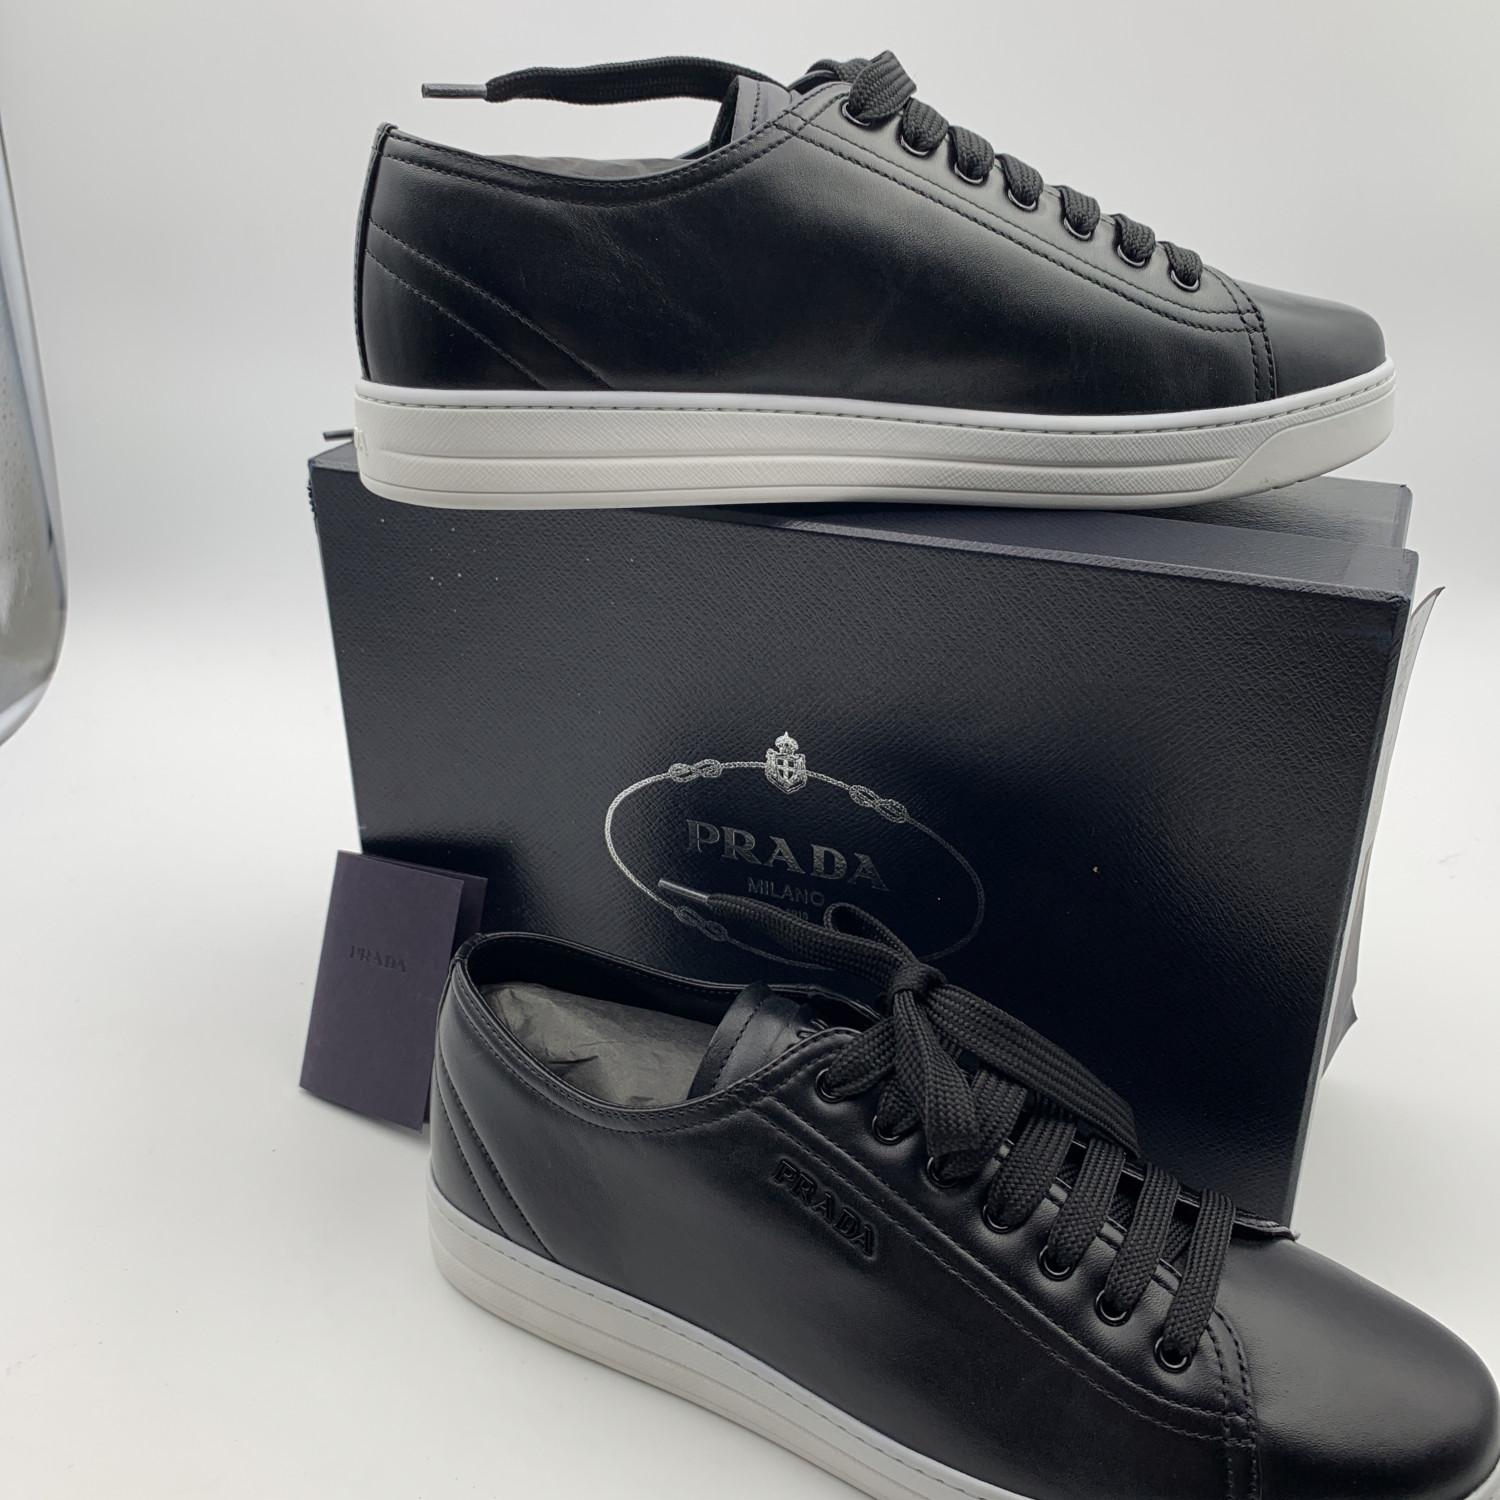 Beautiful Prada Sneakers, mod. 3E6187. Black leather. They feature a lace-up front, round toe and Prada logo lettering on the side. White rubber sole. Made in Italy. Size: 41 (The size shown for this item is the size indicated by the designer on the